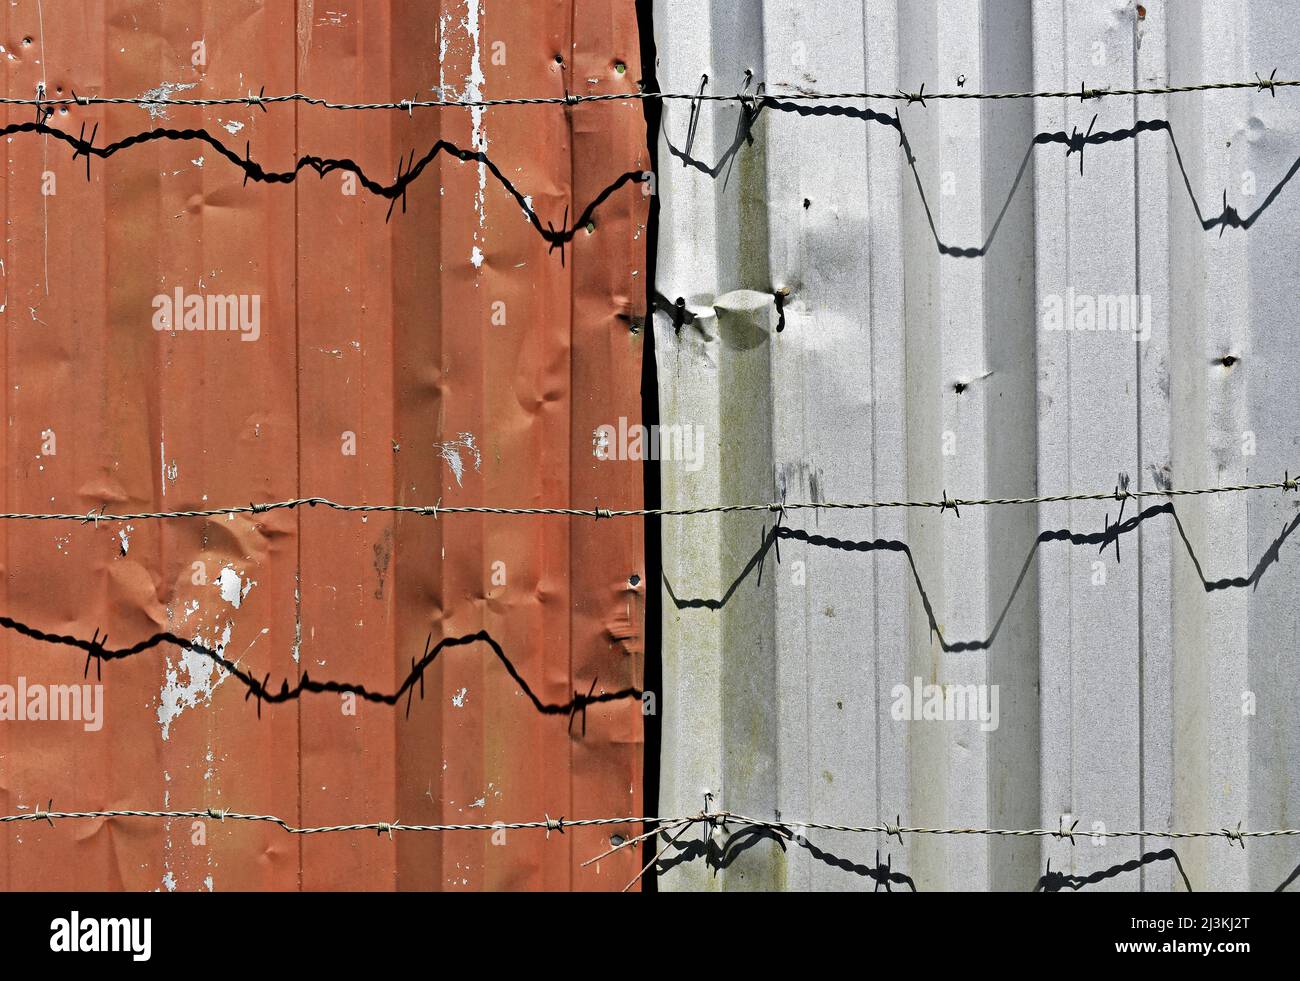 Metallic surfaces and barbed wire Stock Photo